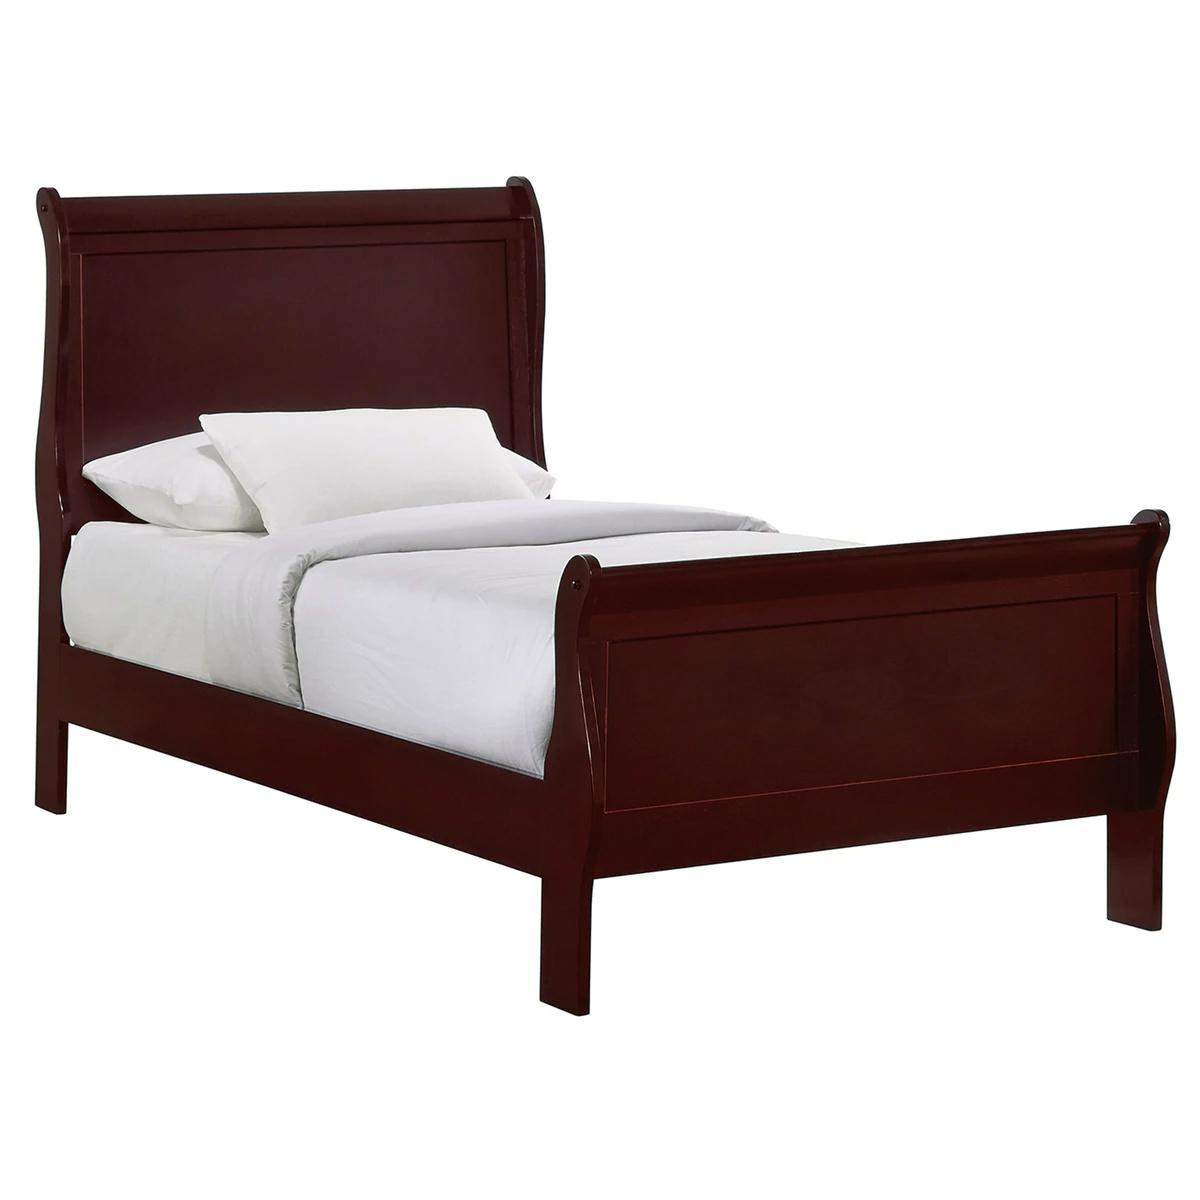 Contemporary, Simple Panel Bed Louis Philip B3850-T-Bed in Brown 